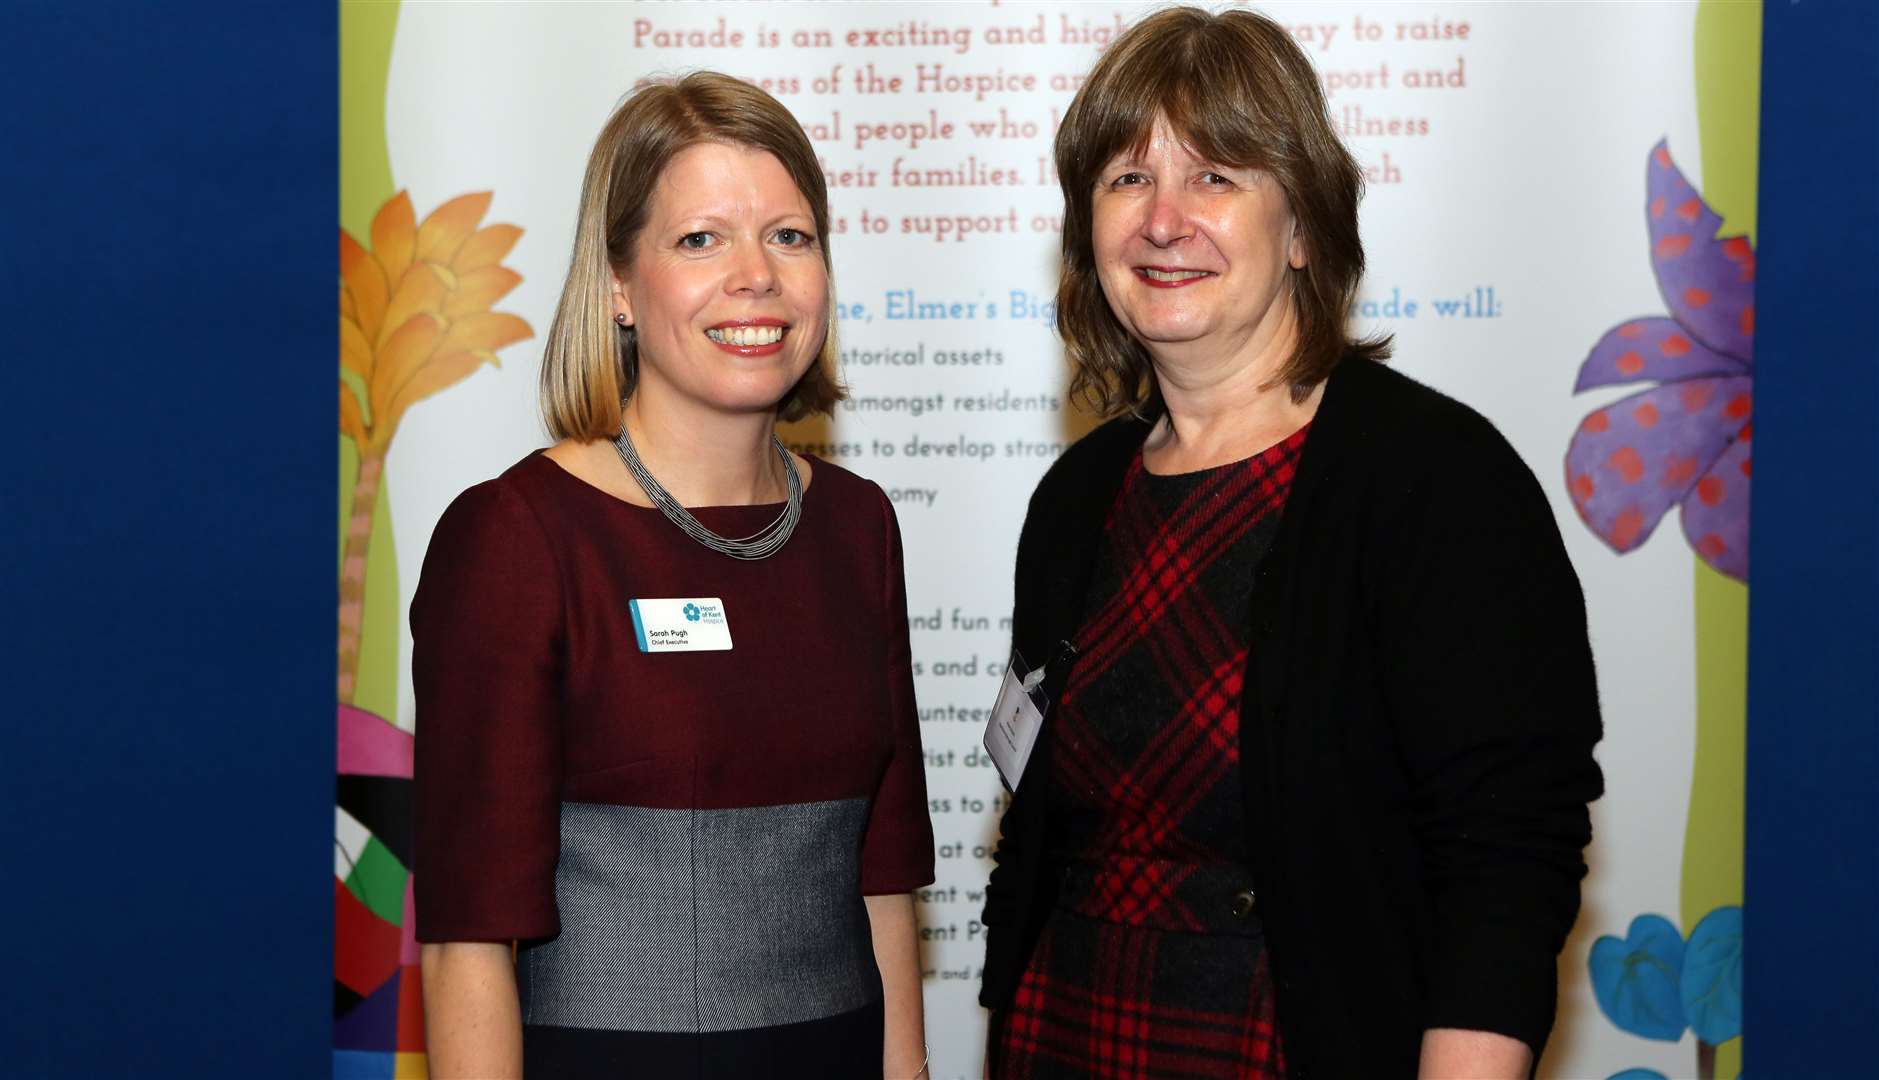 Sarah Pugh from the Heart of Kent Hospice and Alison Broom from Maidstone Borough Council